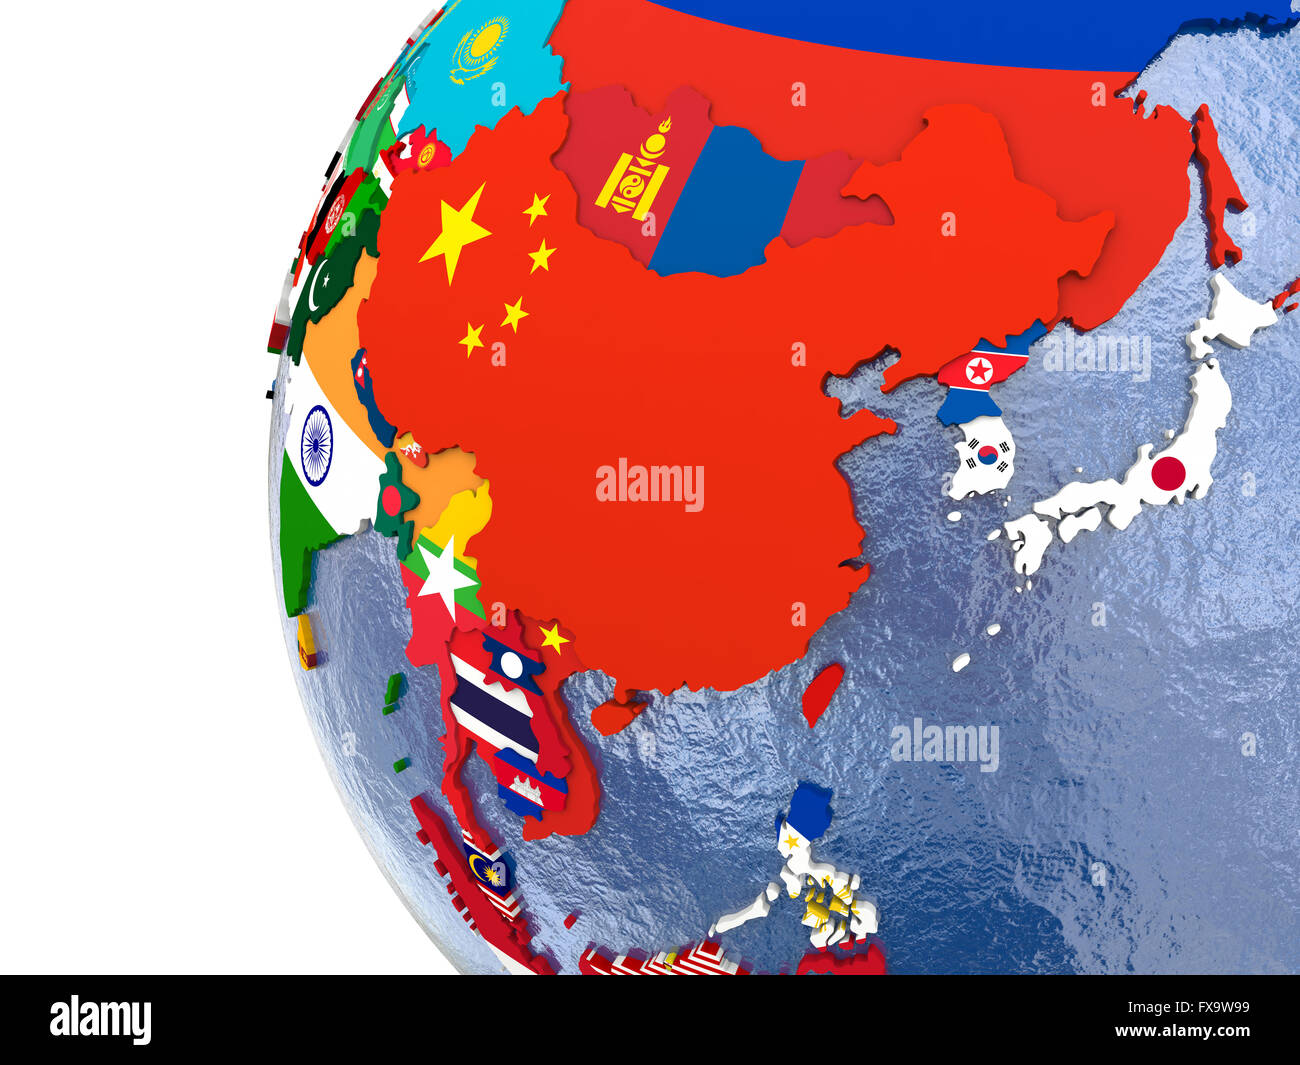 Political map of east Asia with each country represented by its national flag. Stock Photo